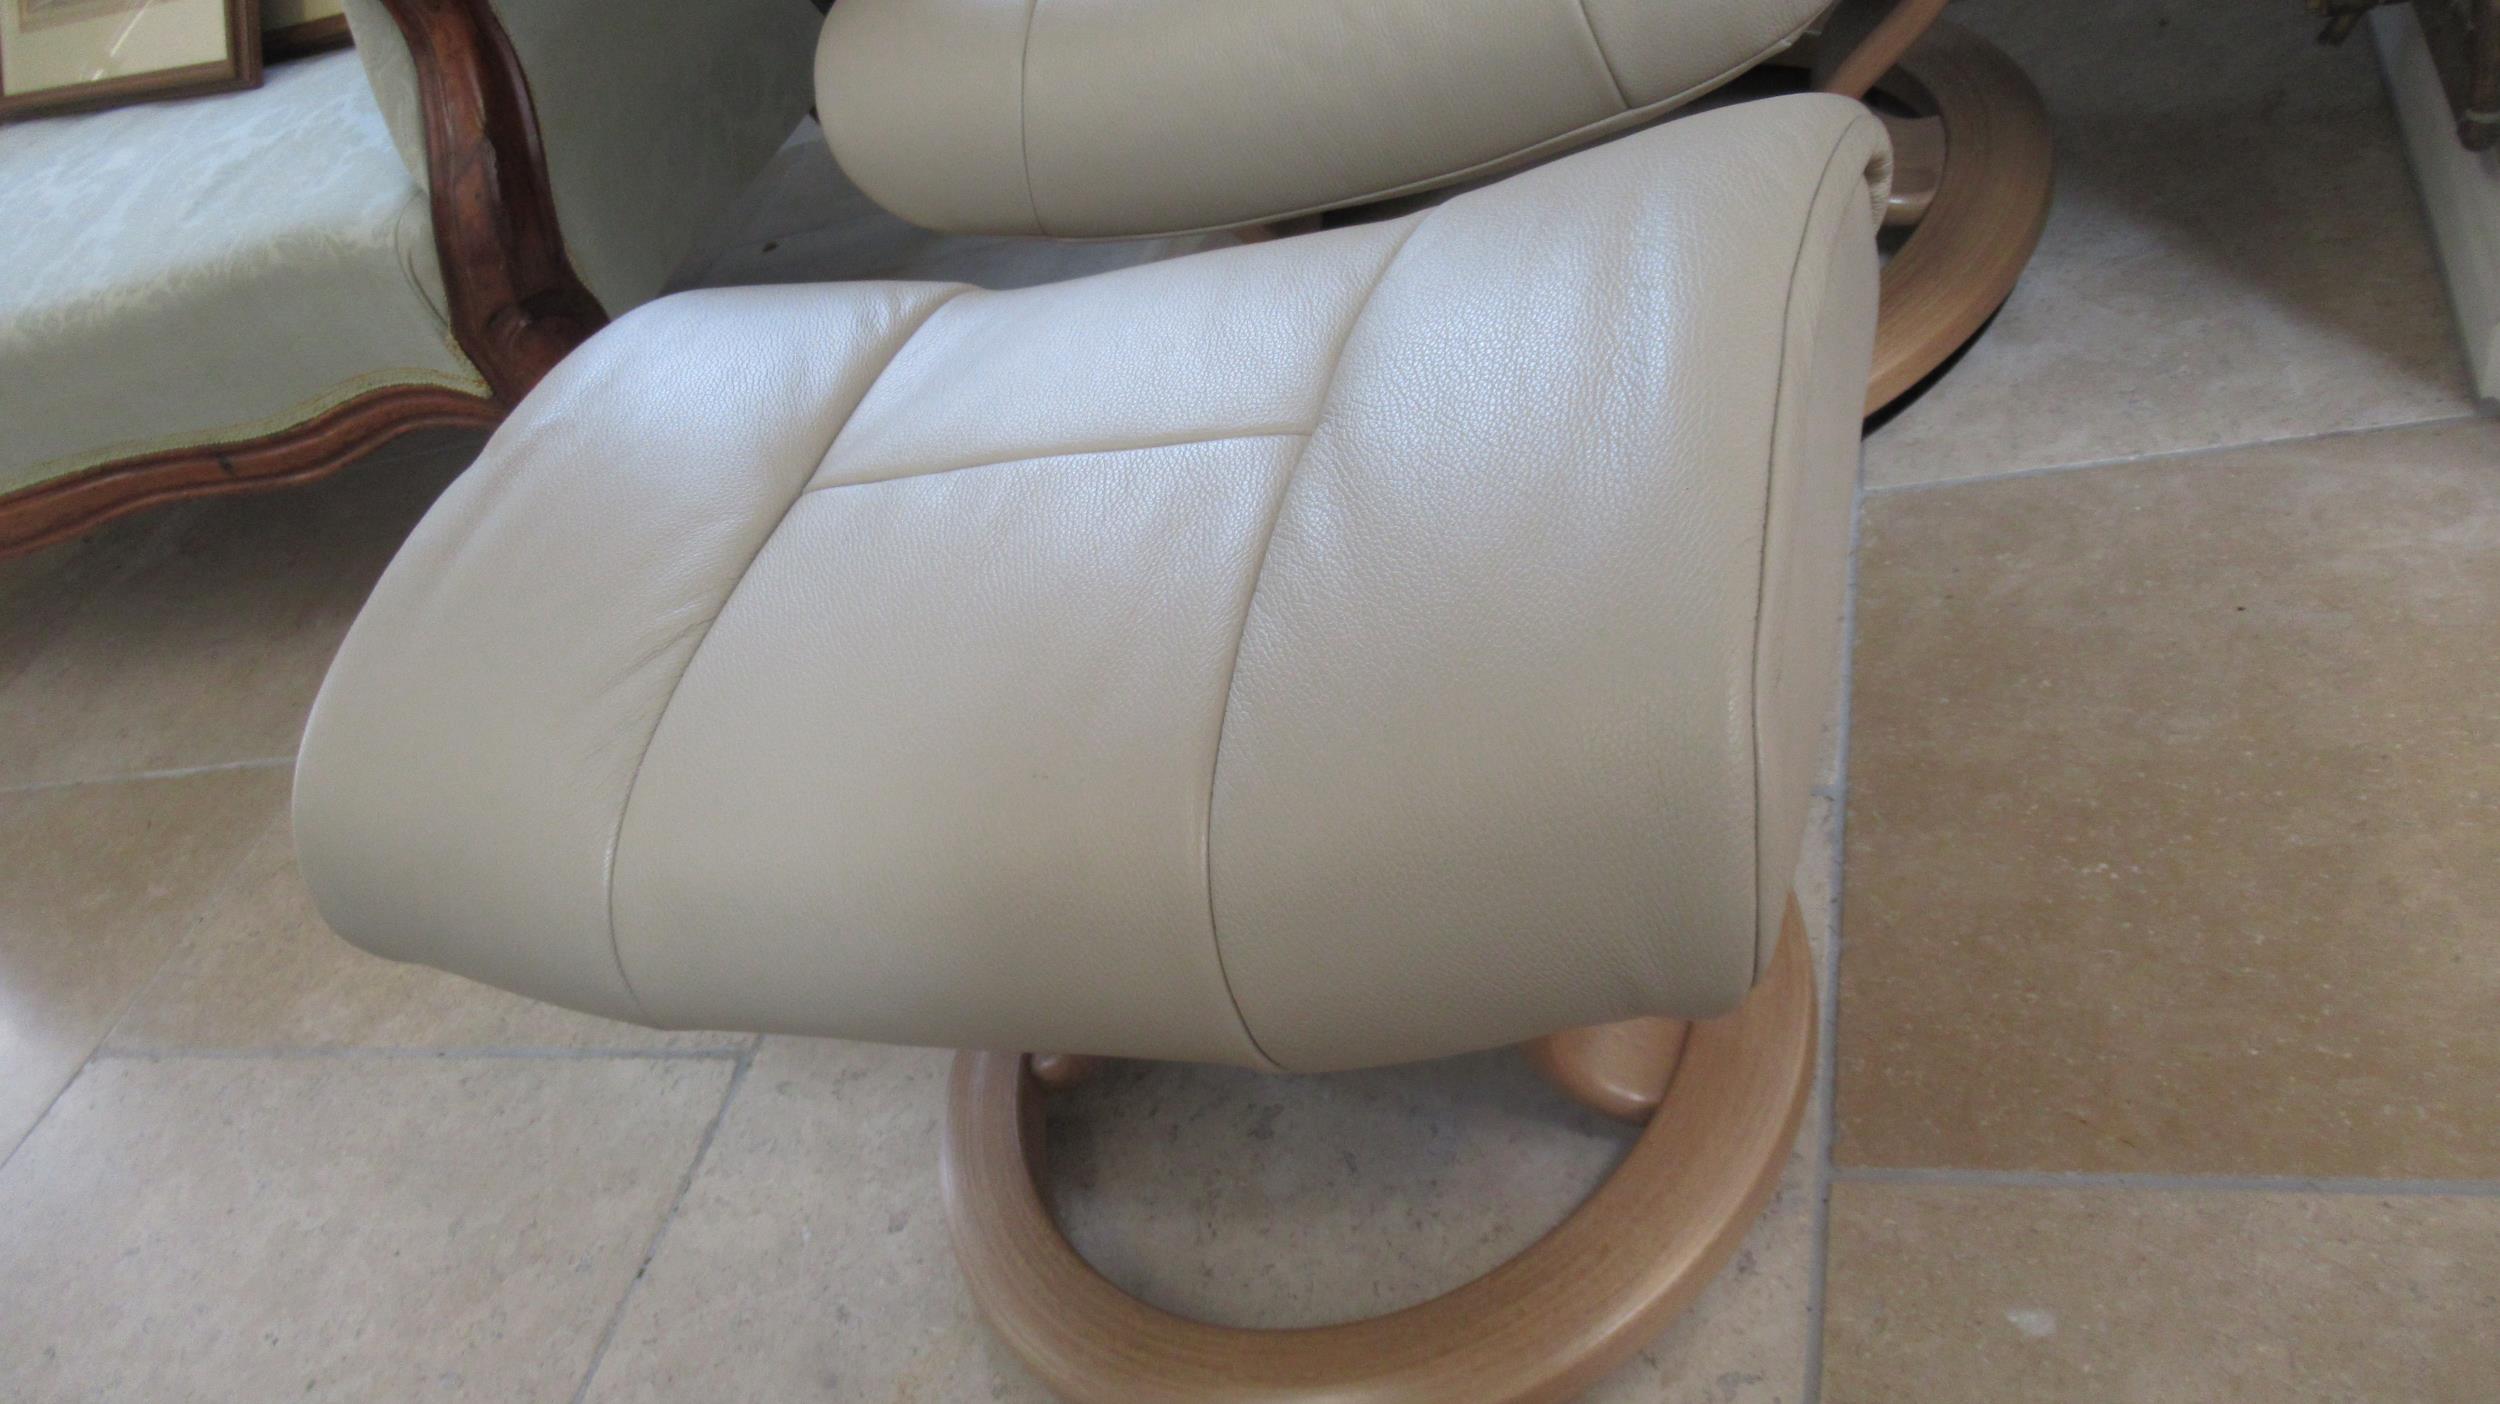 A Stressless Mayfair medium chair and stool, oak frame, with beige leather upholstery - Bild 3 aus 3